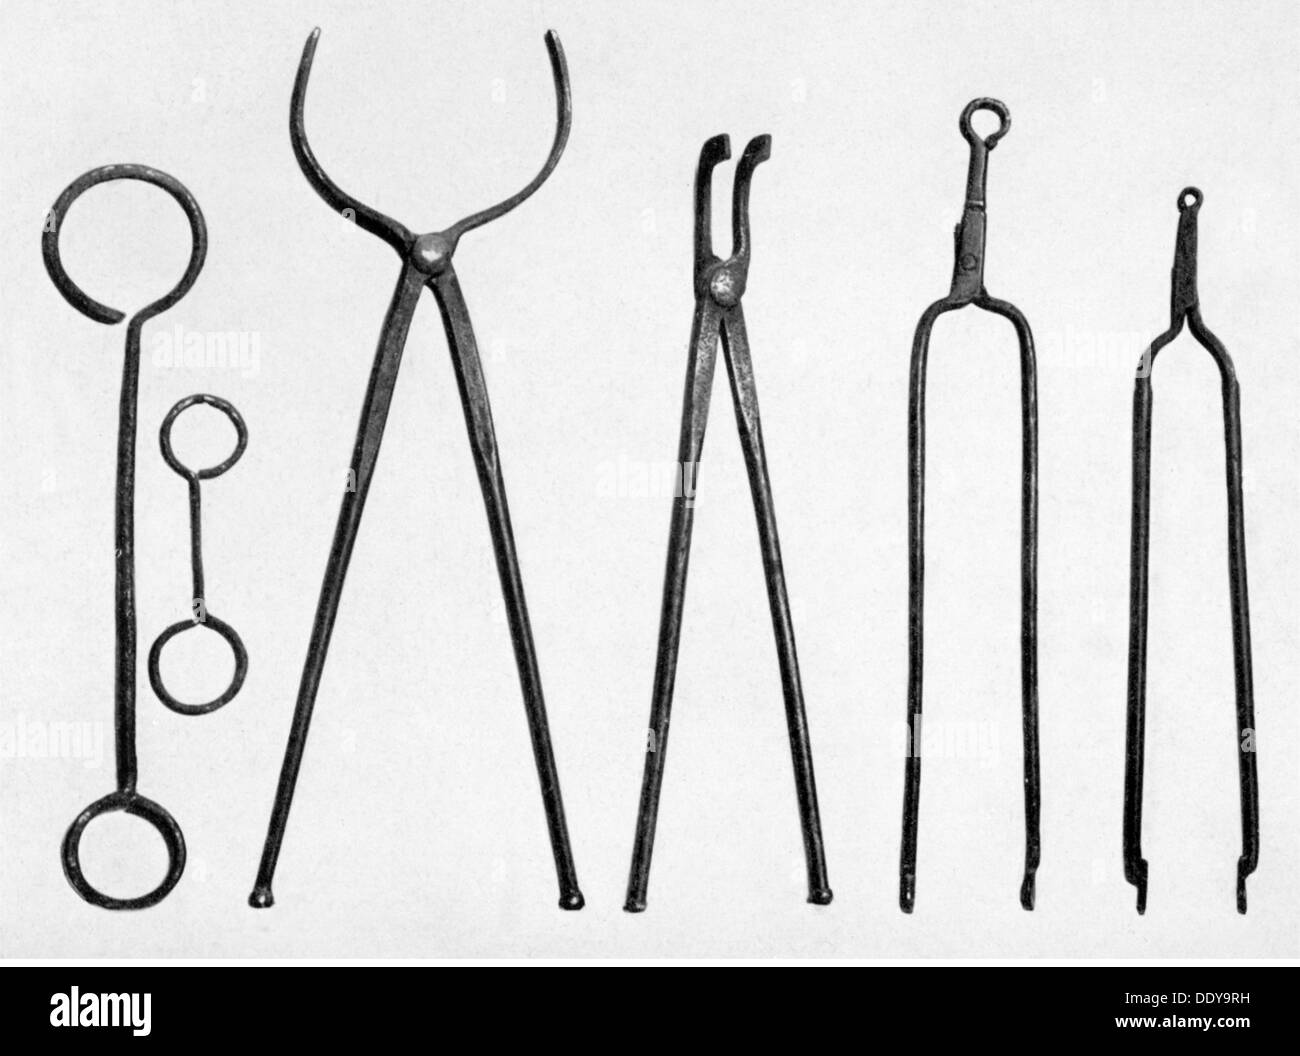 medicine, pharmacy, pharmaceutical instruments, forceps, Rath Collection, Frankfurt, object, objects, stills, Ferrum dicatum discindensis vistris, Forceps pro communi usu, crucible tongs, Forceps pro tigilis, dressing forceps, Forceps pro granis, alchemy, chemistry, pharmaceutics, pharmacology, medicine, medicines, instrument, instruments, historic, historical, Additional-Rights-Clearences-Not Available Stock Photo